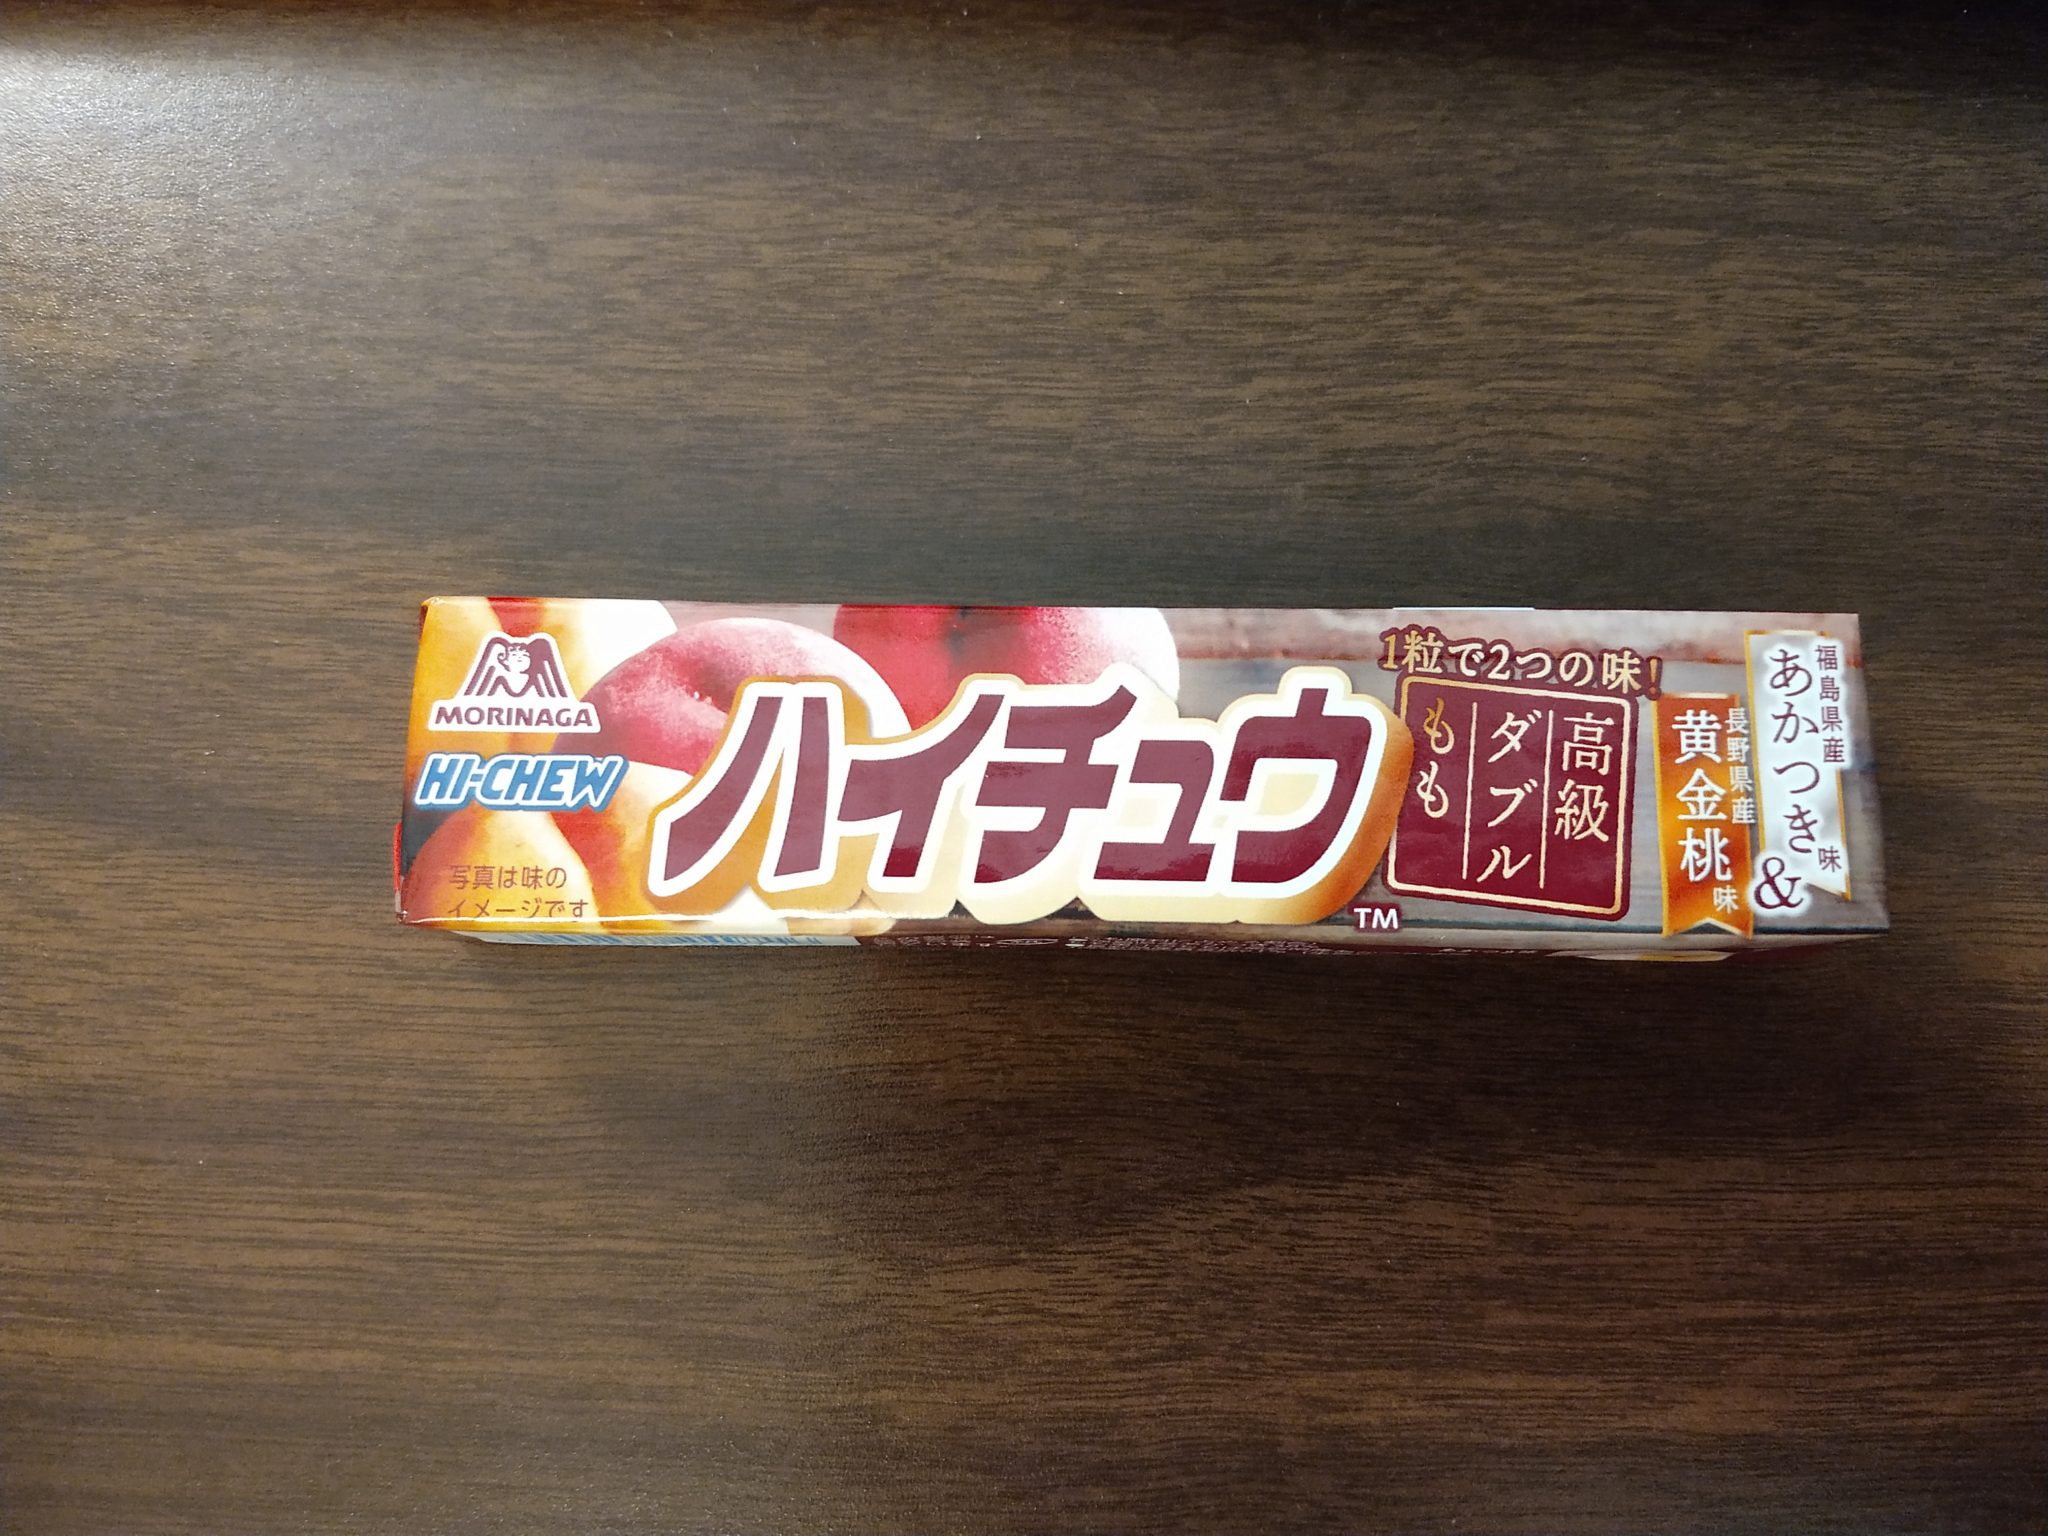 Hi-Chew Doubles – Pink and Golden Peach